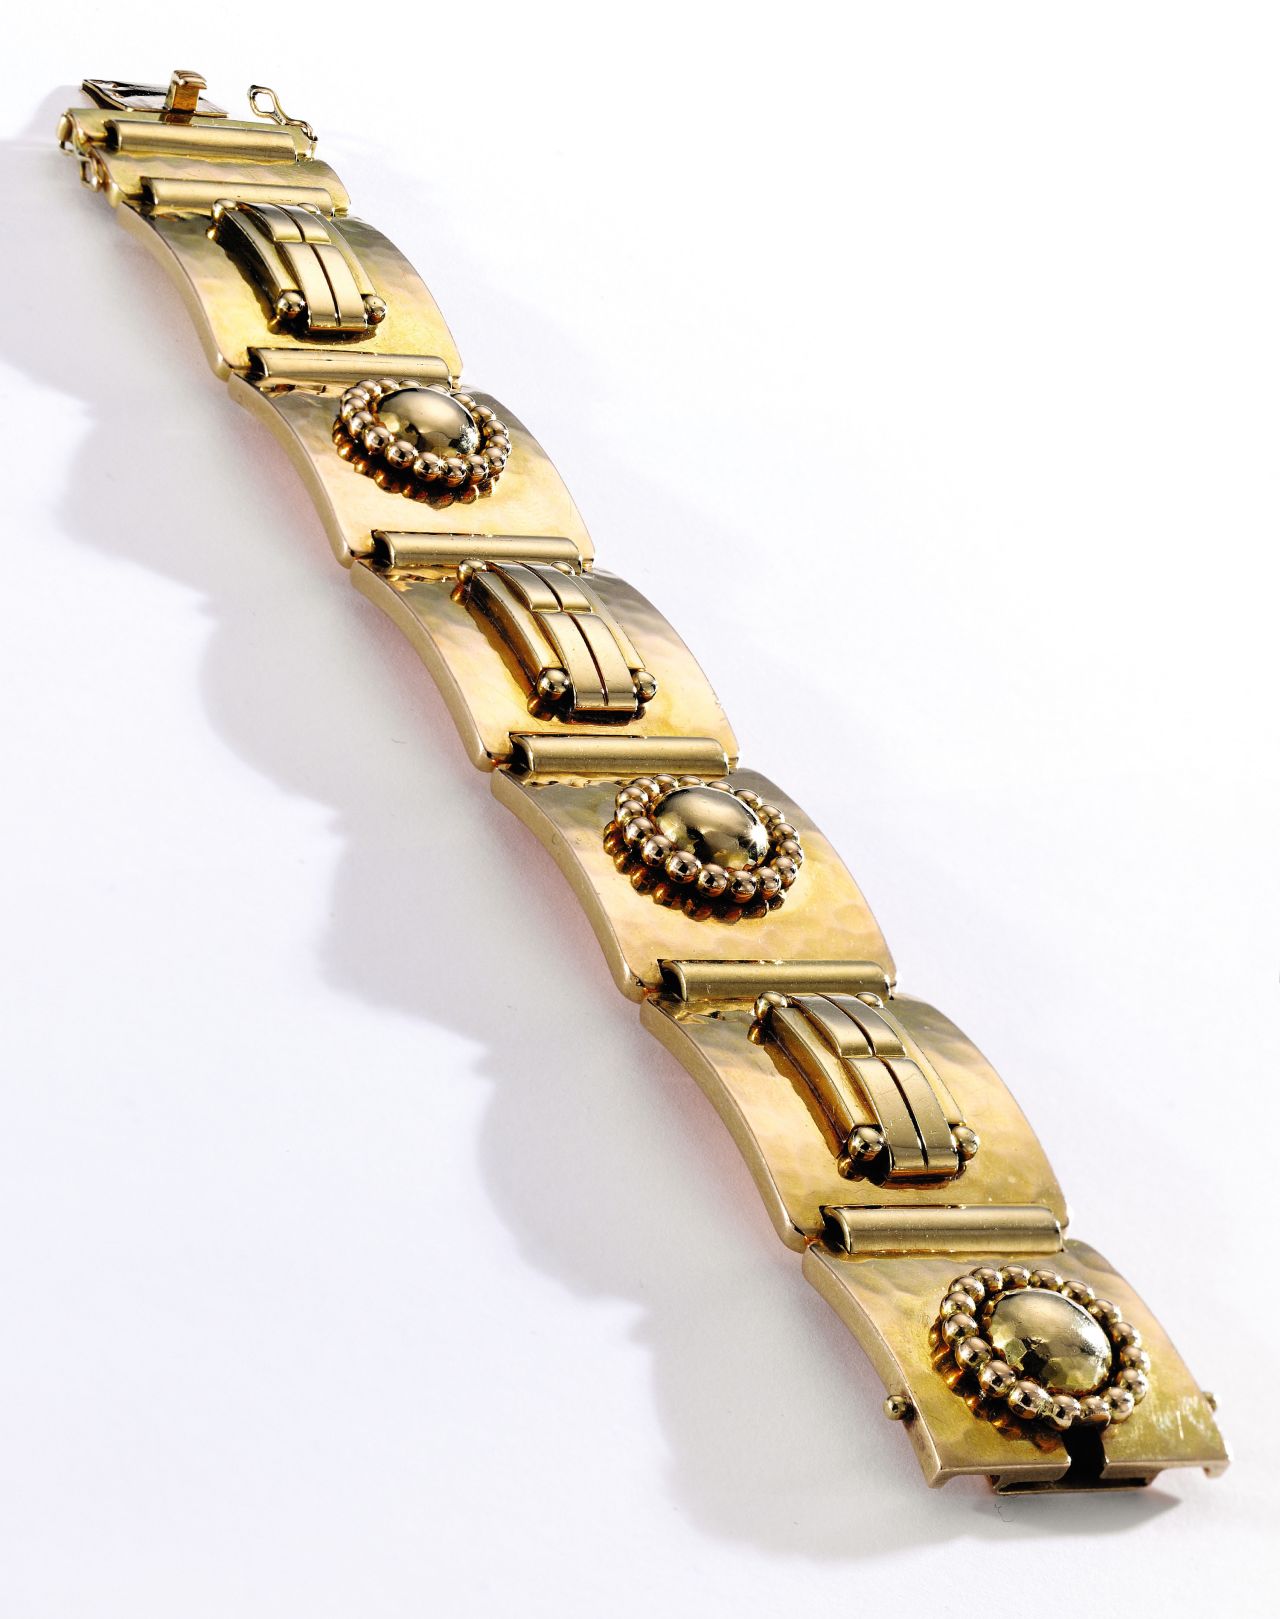 For those looking to avoid ostentatious jewels altogether, this Jean Després 18 karat gold bracelet from the 1930s is the perfect choice. The new owner paid $125,000.